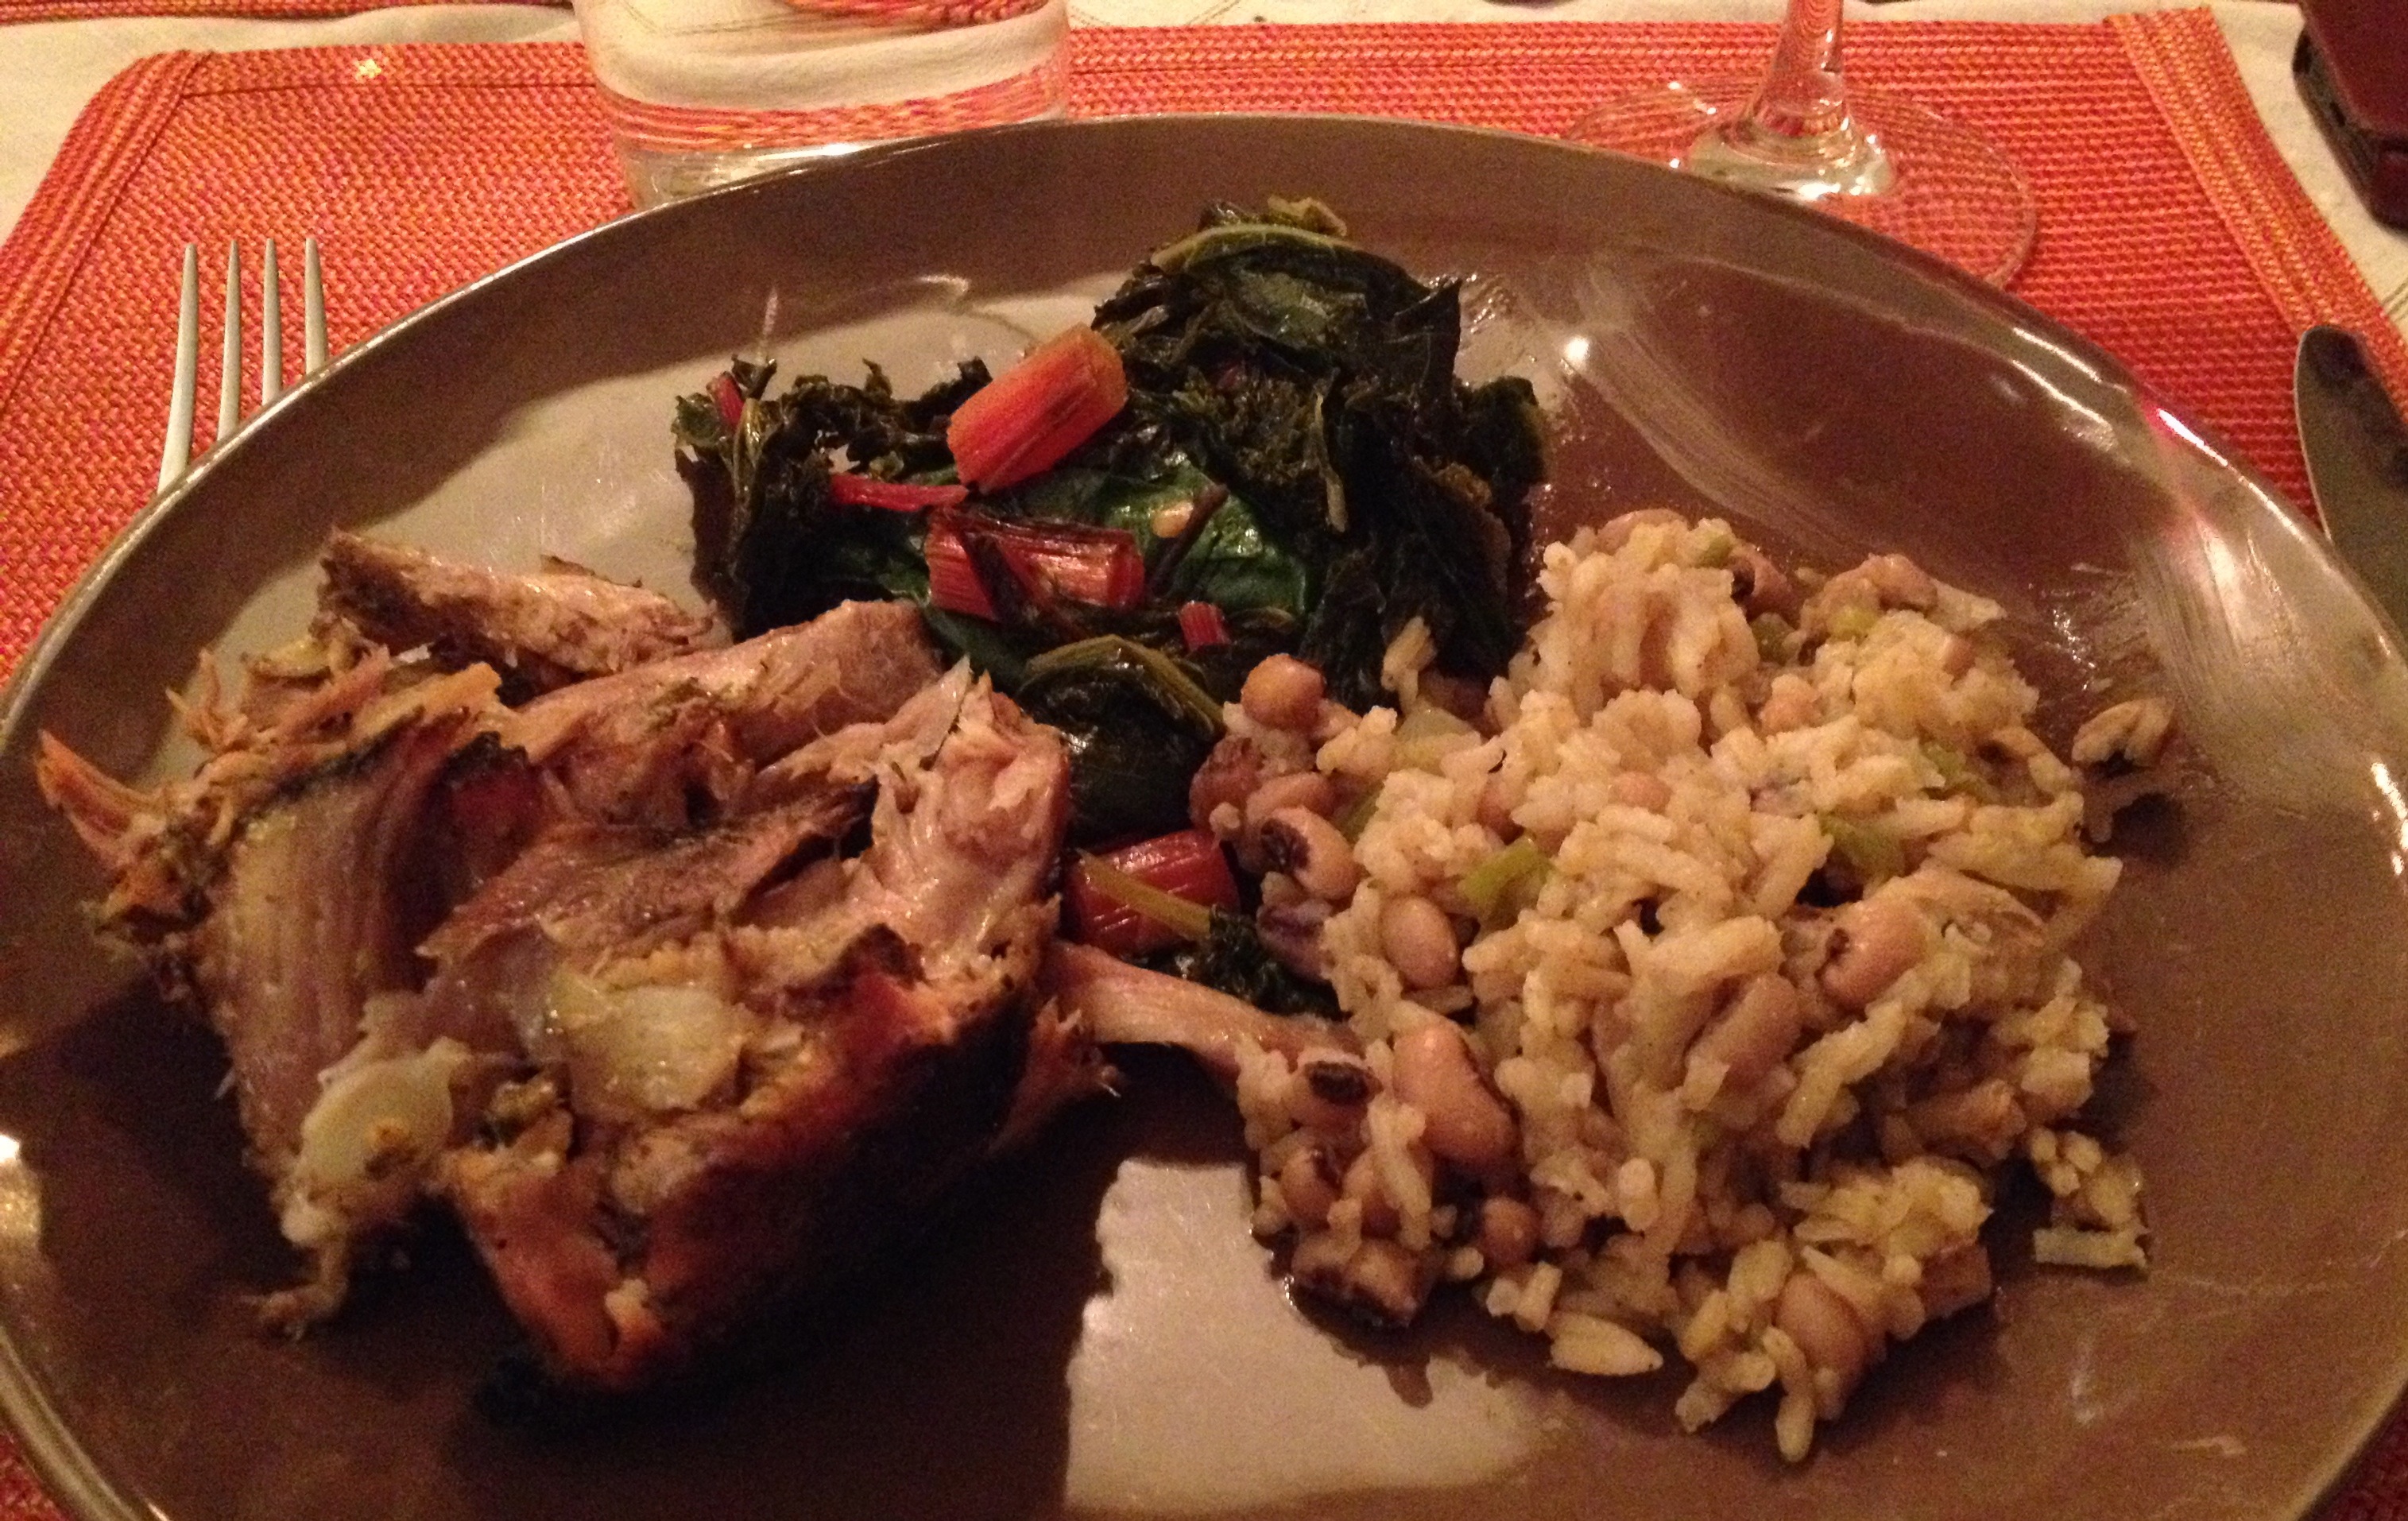 Dinner plate with peril, sautéed kale and Swiss chard with Jasmine rice and black eyed peas.